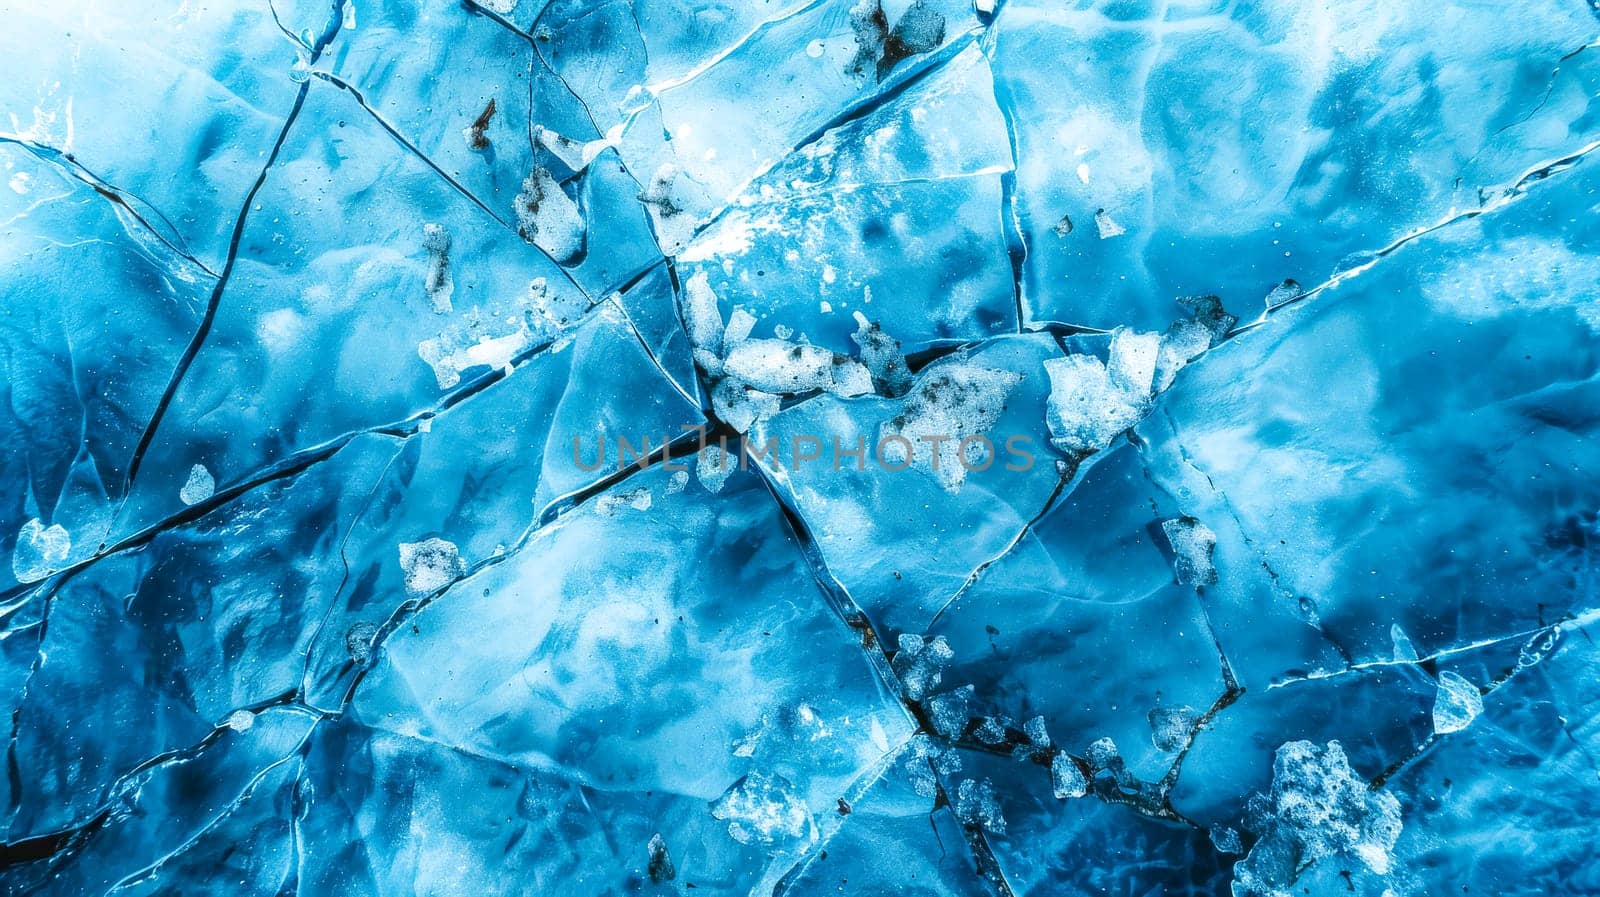 Close-up of abstract crystalline blue ice textures in the frozen glacier, showcasing the natural patterns and translucent beauty of the icy surface in the cold arctic environment